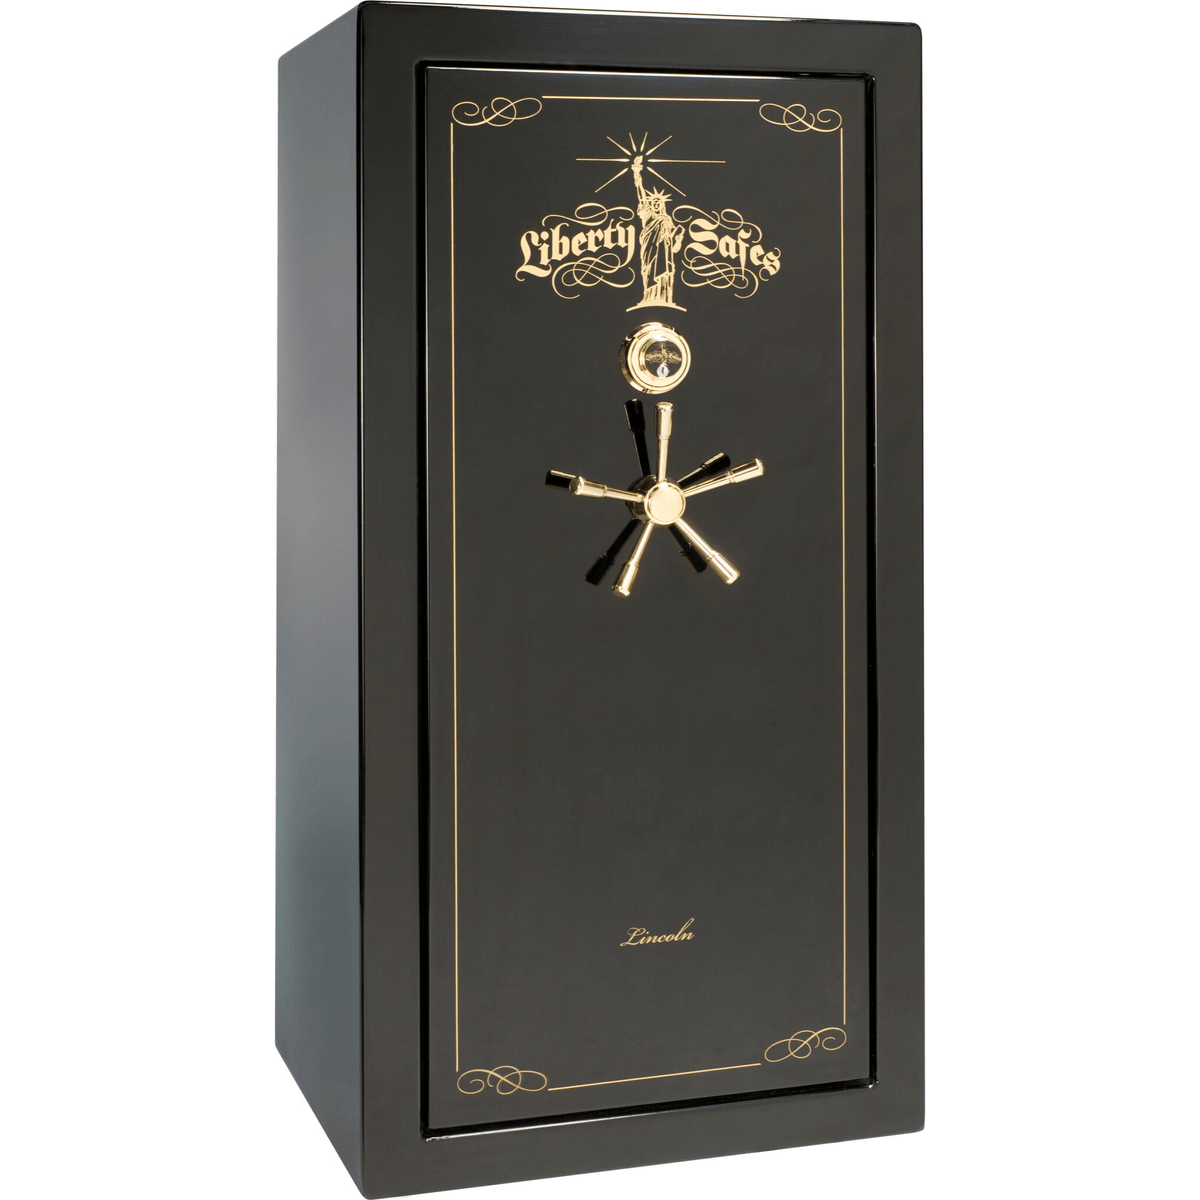 Liberty Lincoln 25 Safe in Black Gloss with Brass Mechanical Lock.